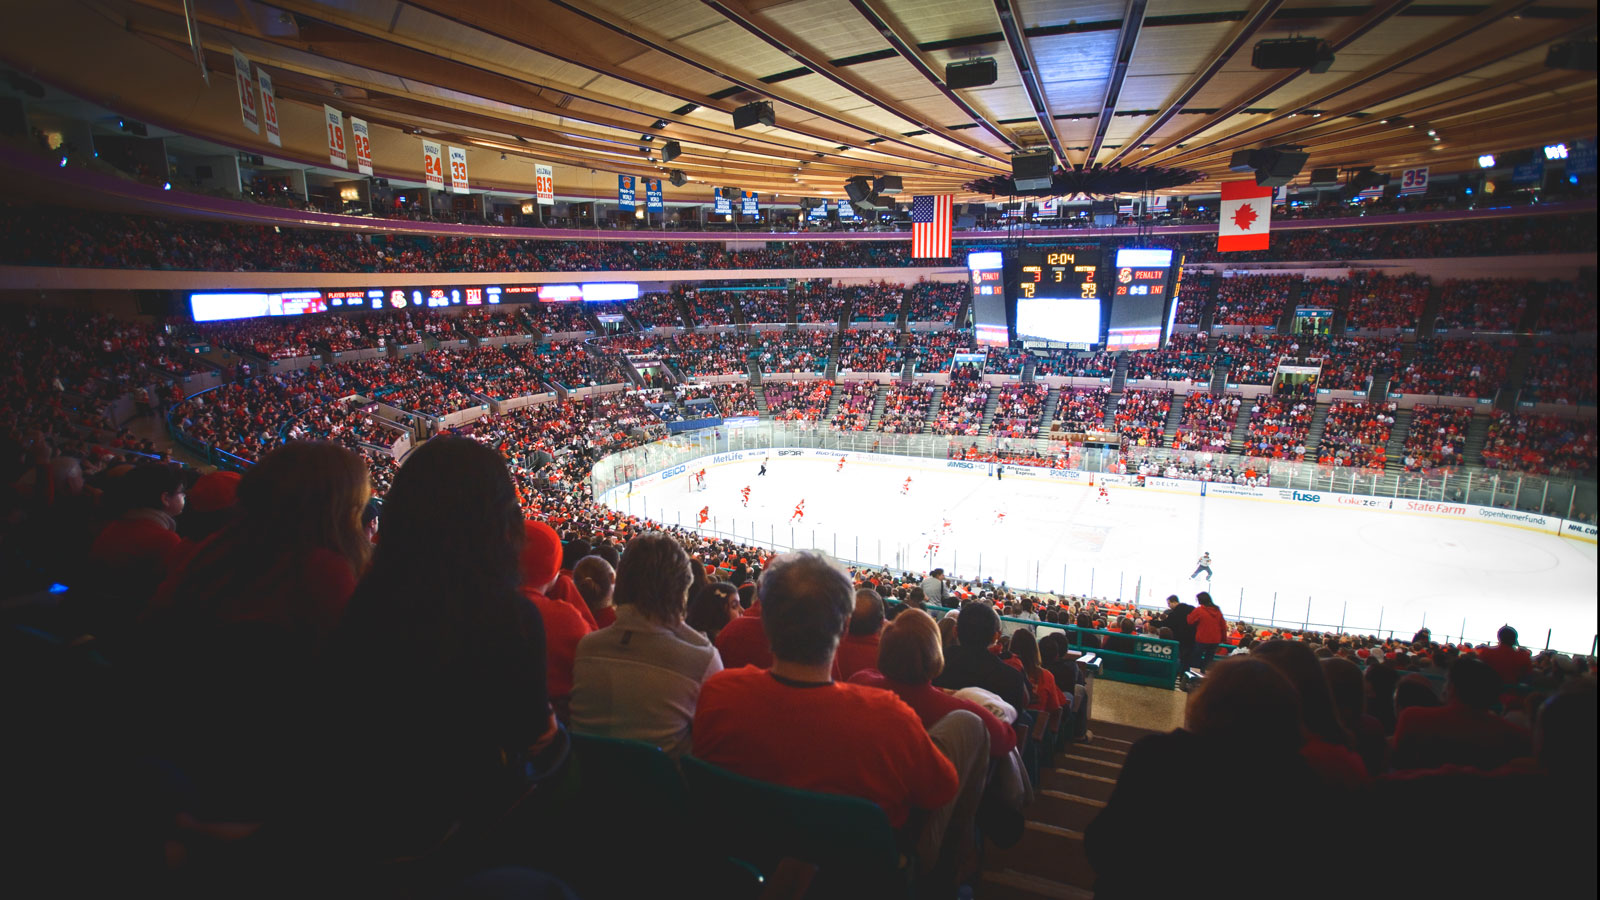 Madison Square Garden filled with Cornell men's hockey fans watching the Red Hot Hockey game against Boston University